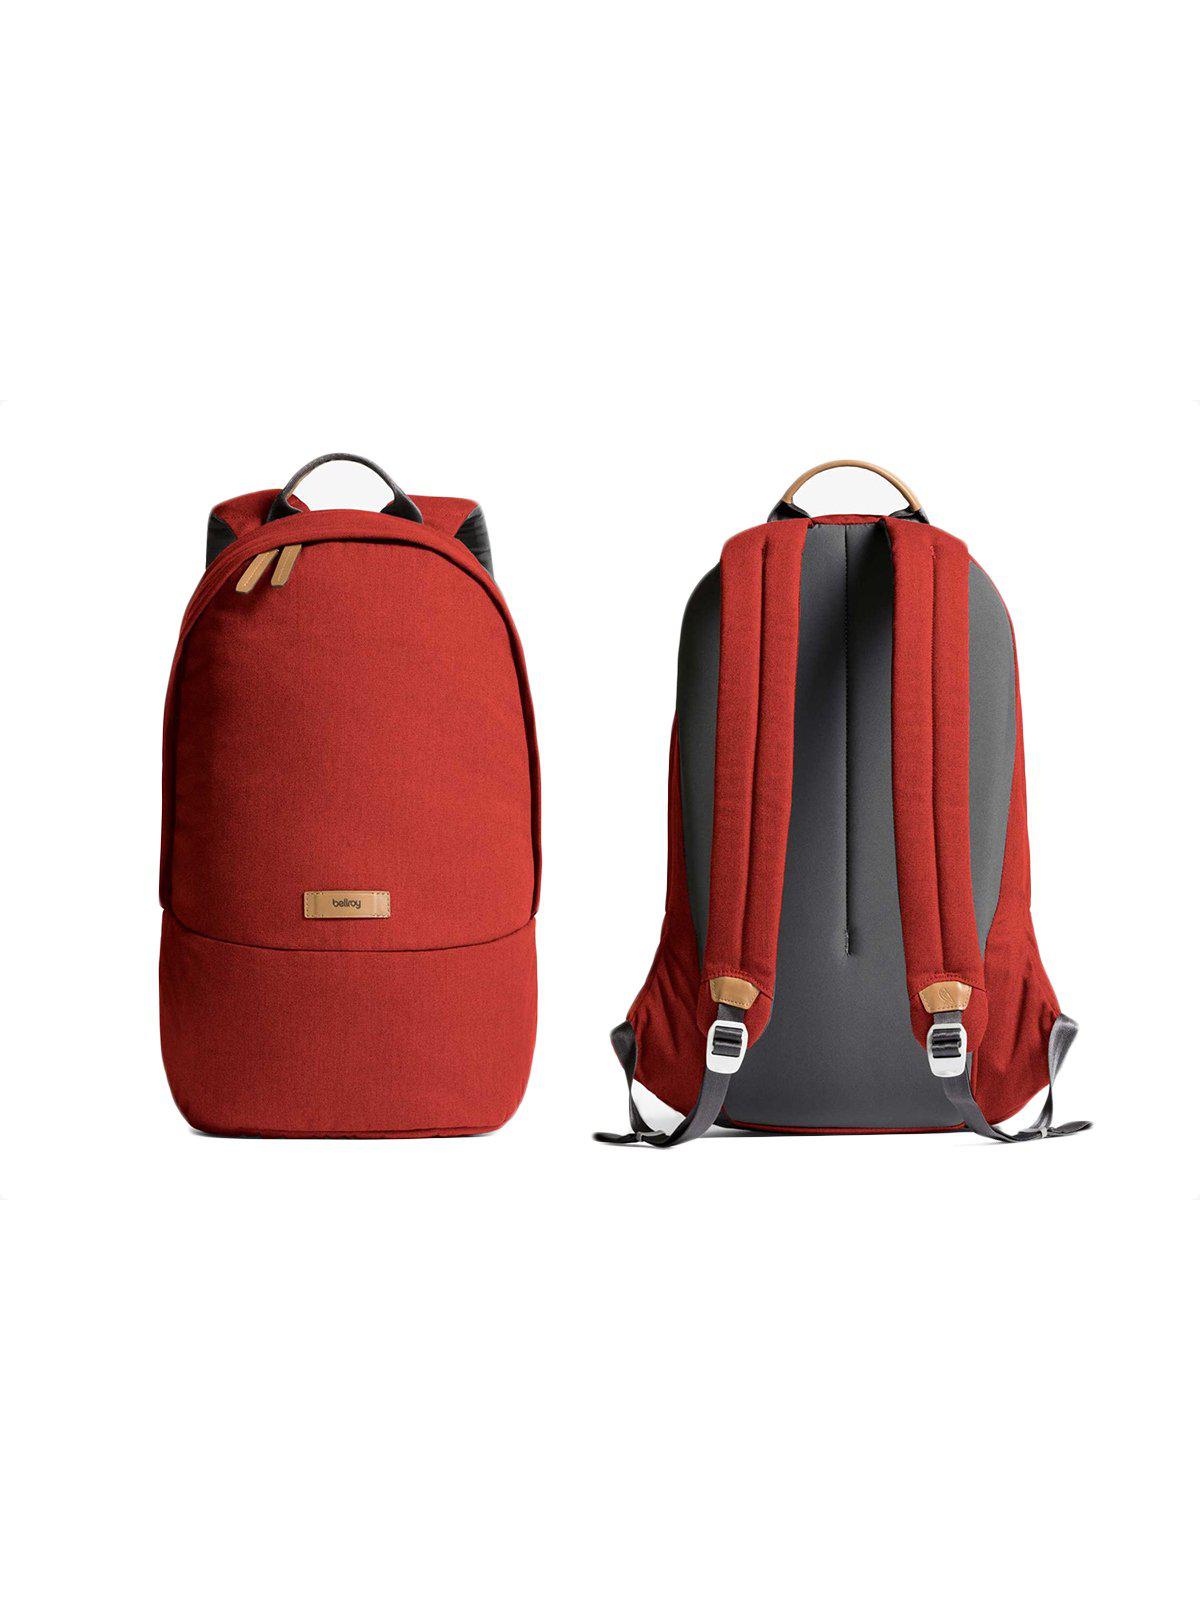 Bellroy Classic Backpack Red Ochre - MORE by Morello Indonesia